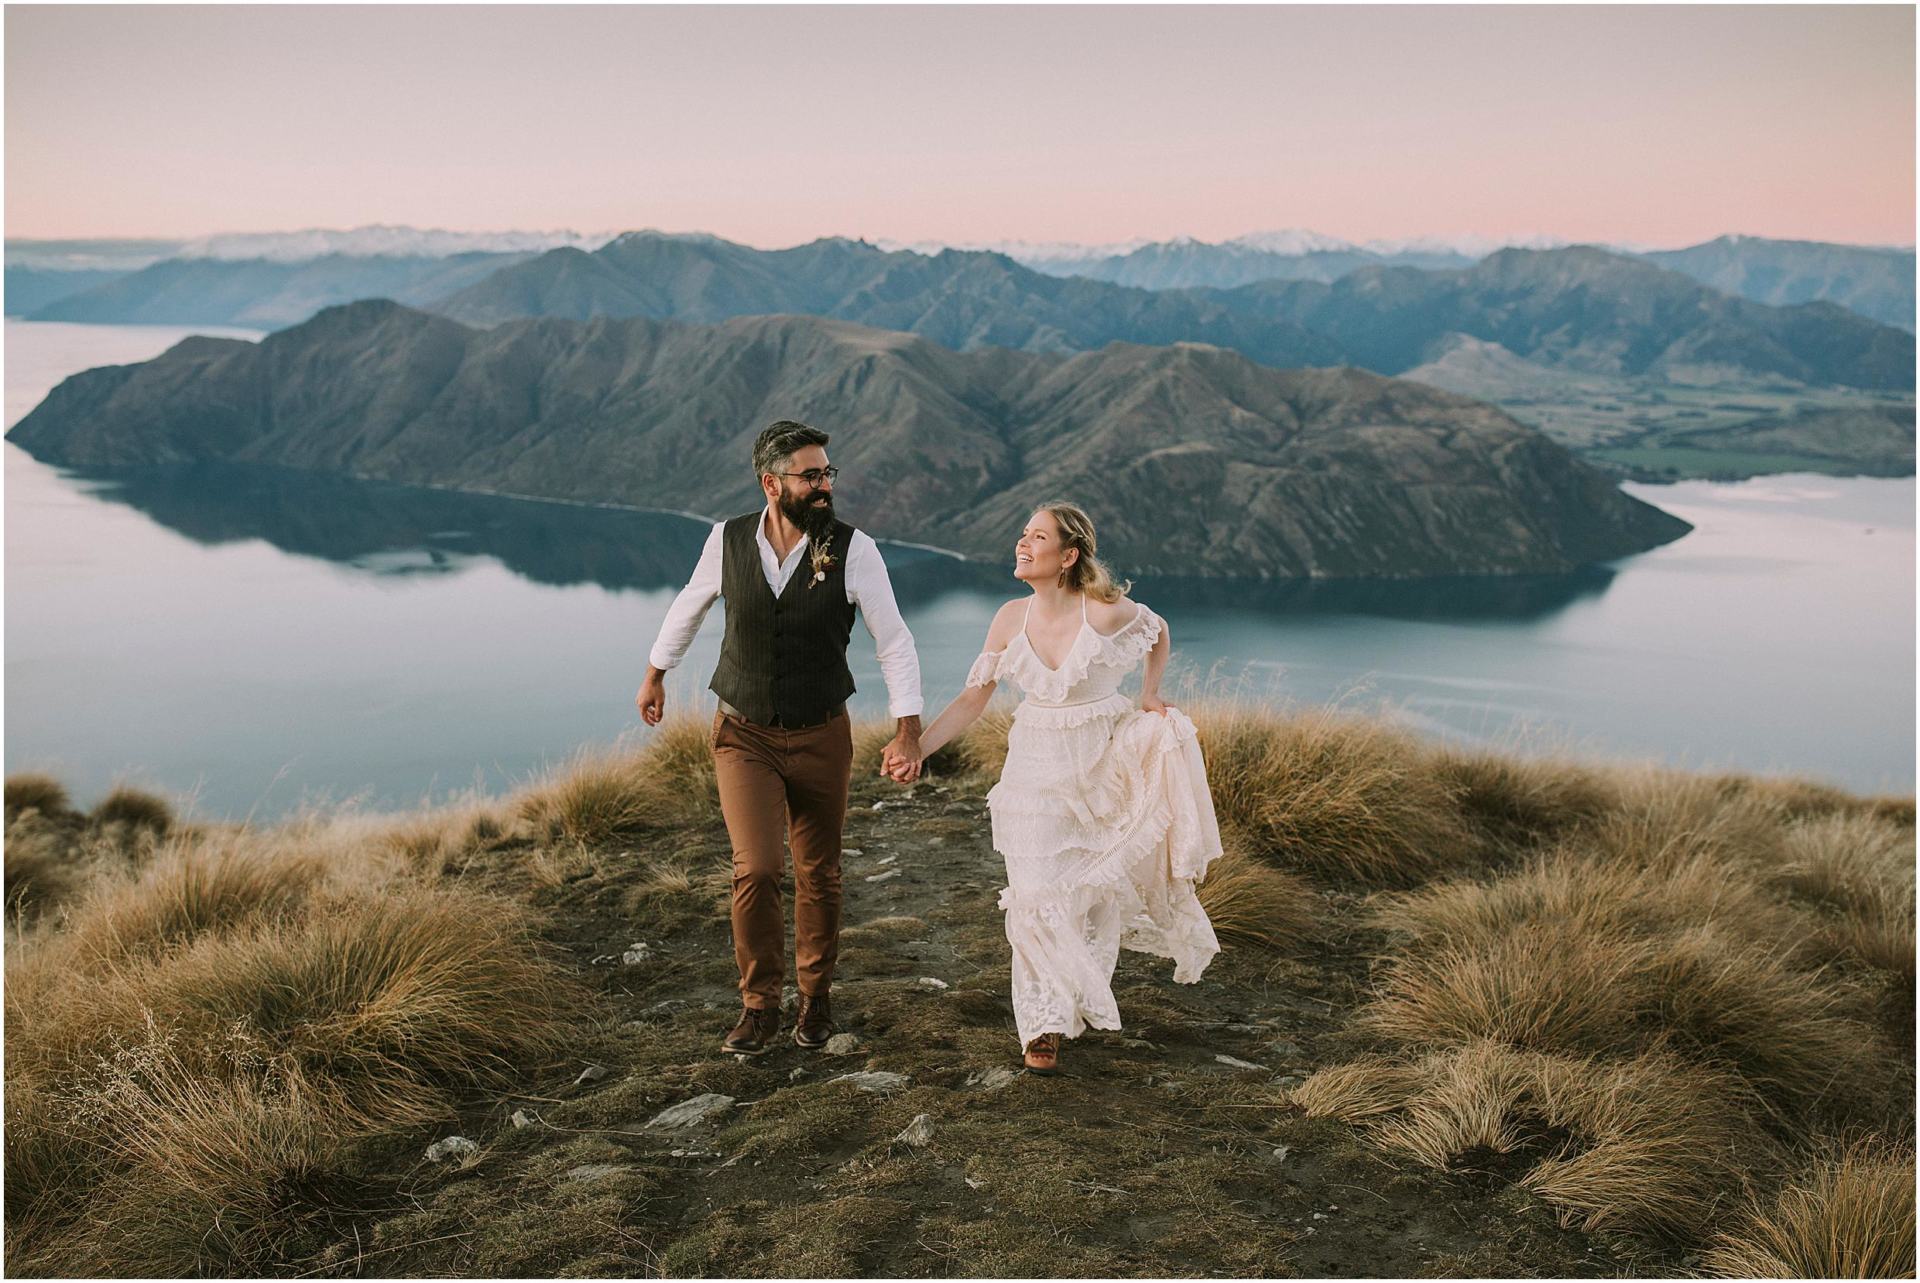 Charlotte Kiri Photography - elopement photography with the bride and groom holding hands and laughing, on top of Roy's Peak, with a stunning view of lakes and mountains behind them in Wanaka, New Zealand